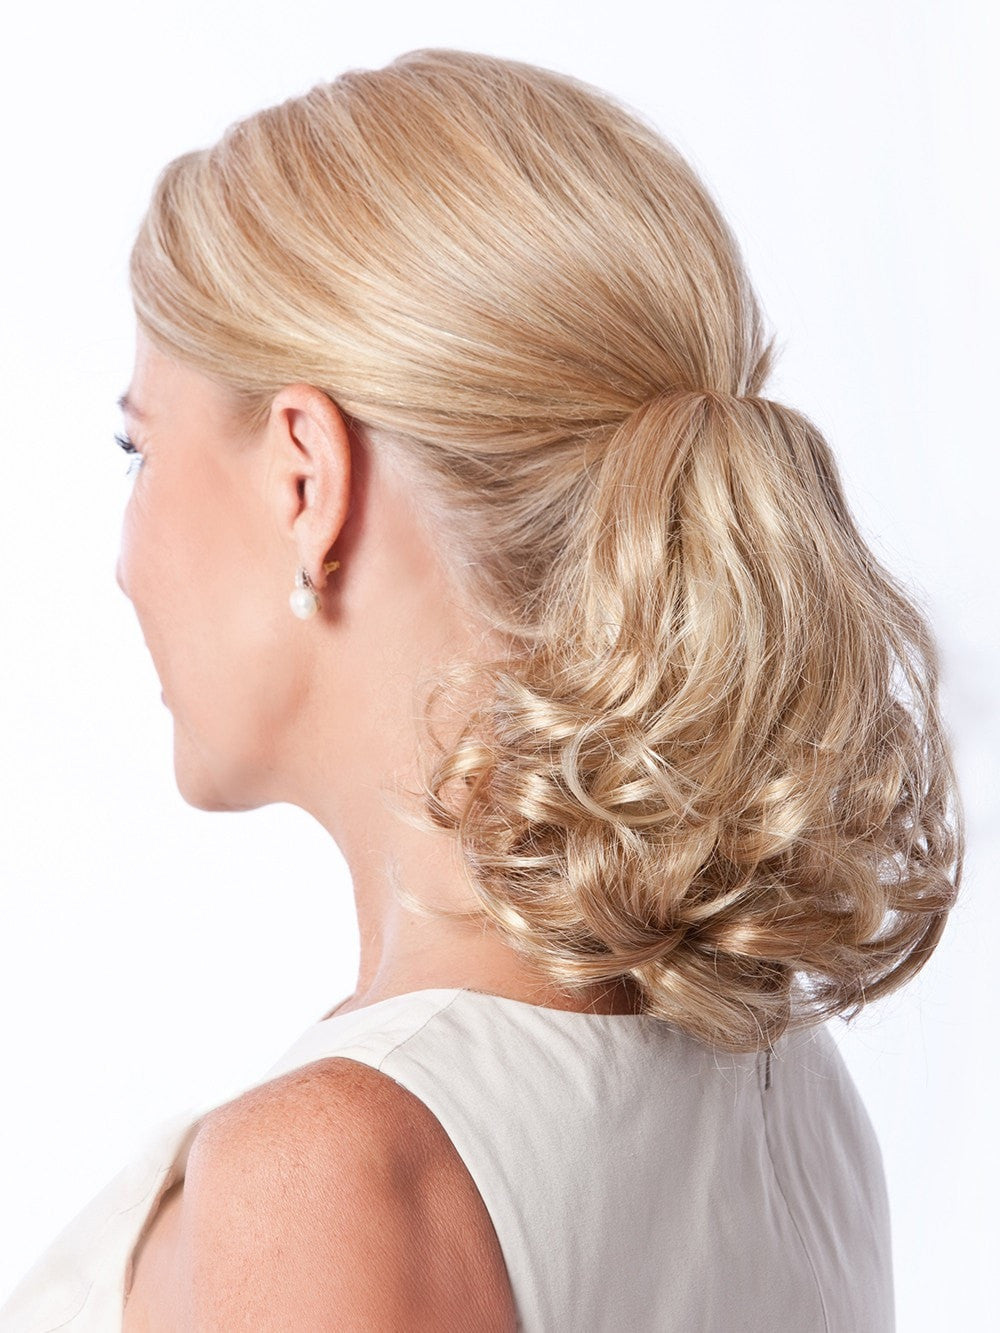 Ponytail clip-on (4" Claw Clip) Full Ponytail that Instantly adds Volume, Length and Bounce